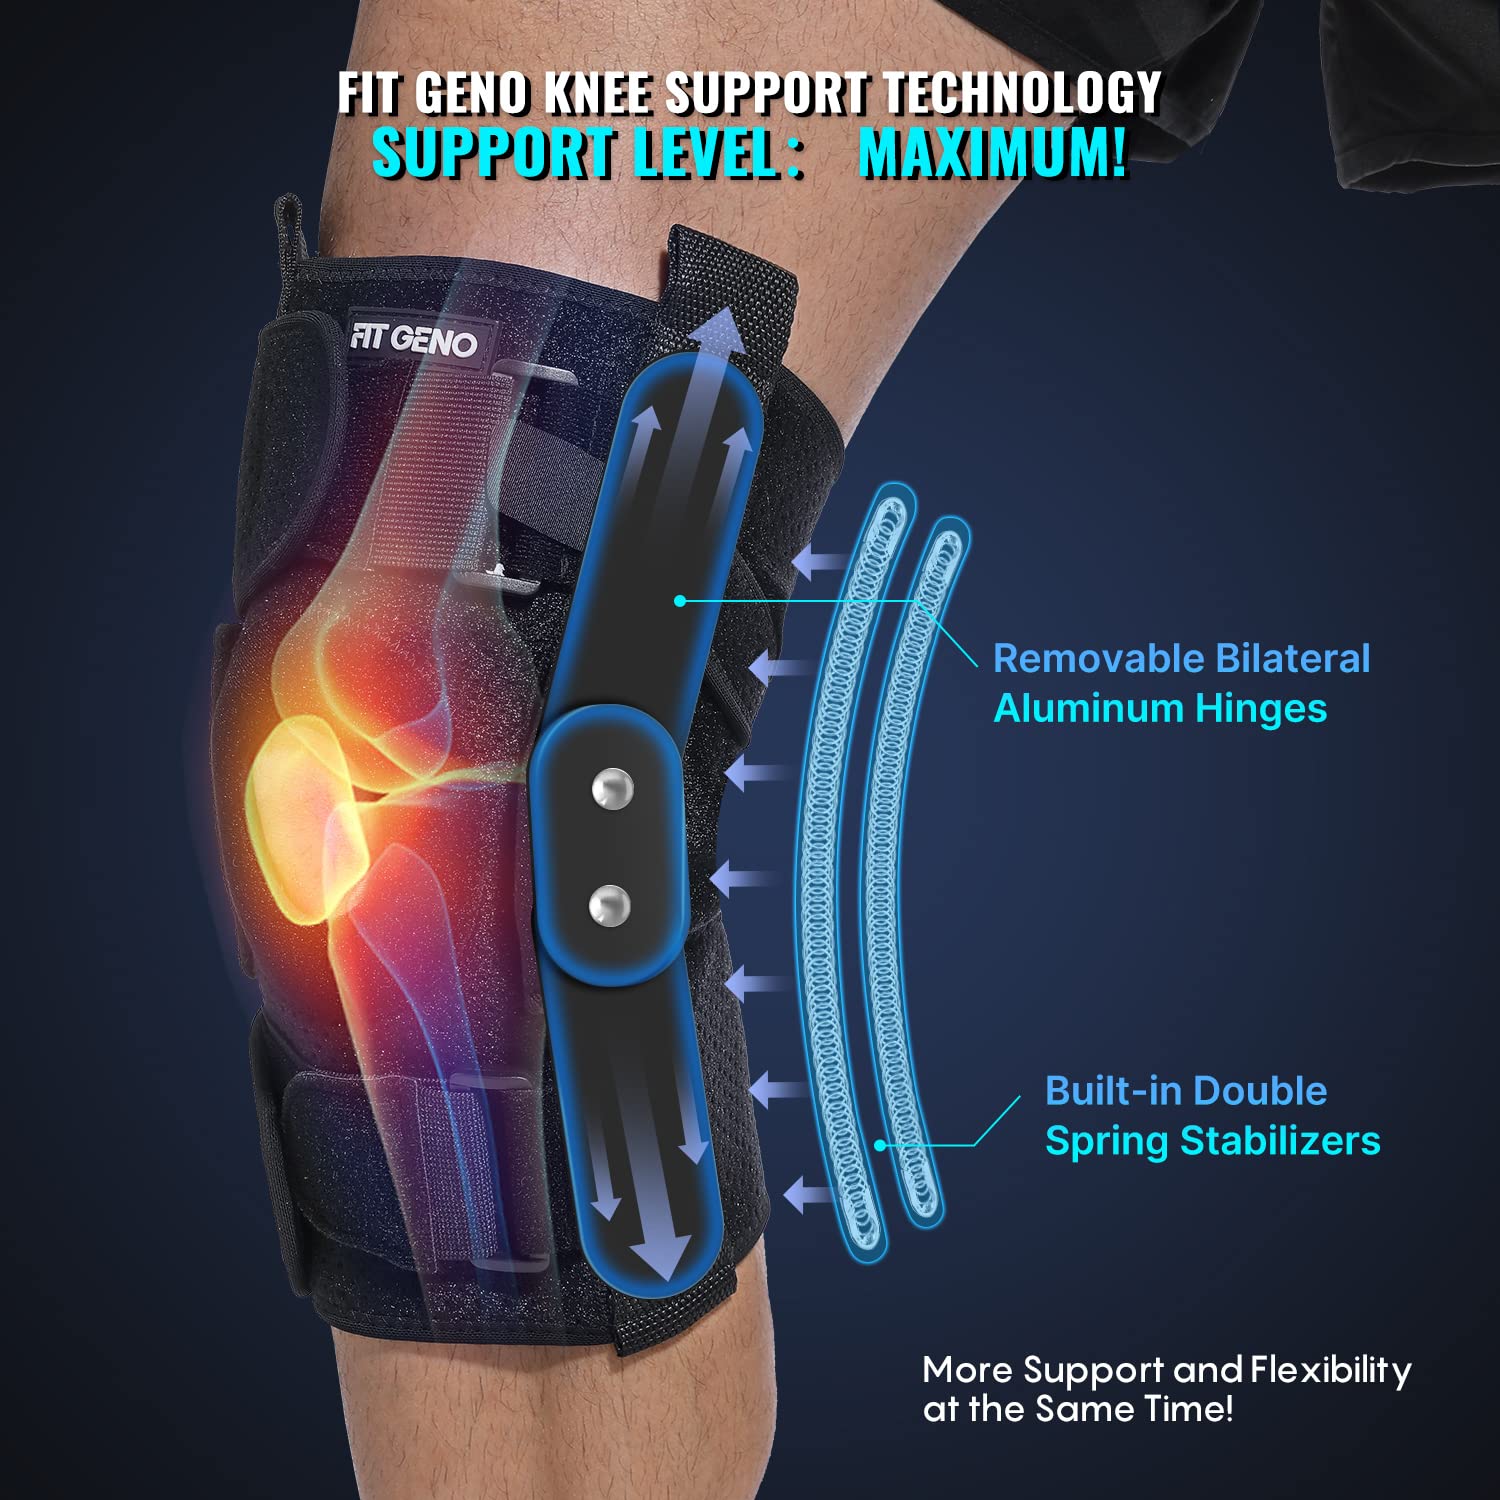 Trainers Choice Zoomer Hinged Knee Brace for Men & Women, Knee Support for  MCL & LCL Ligament Sprains, Osteoarthritis & Meniscal Injuries - M/L